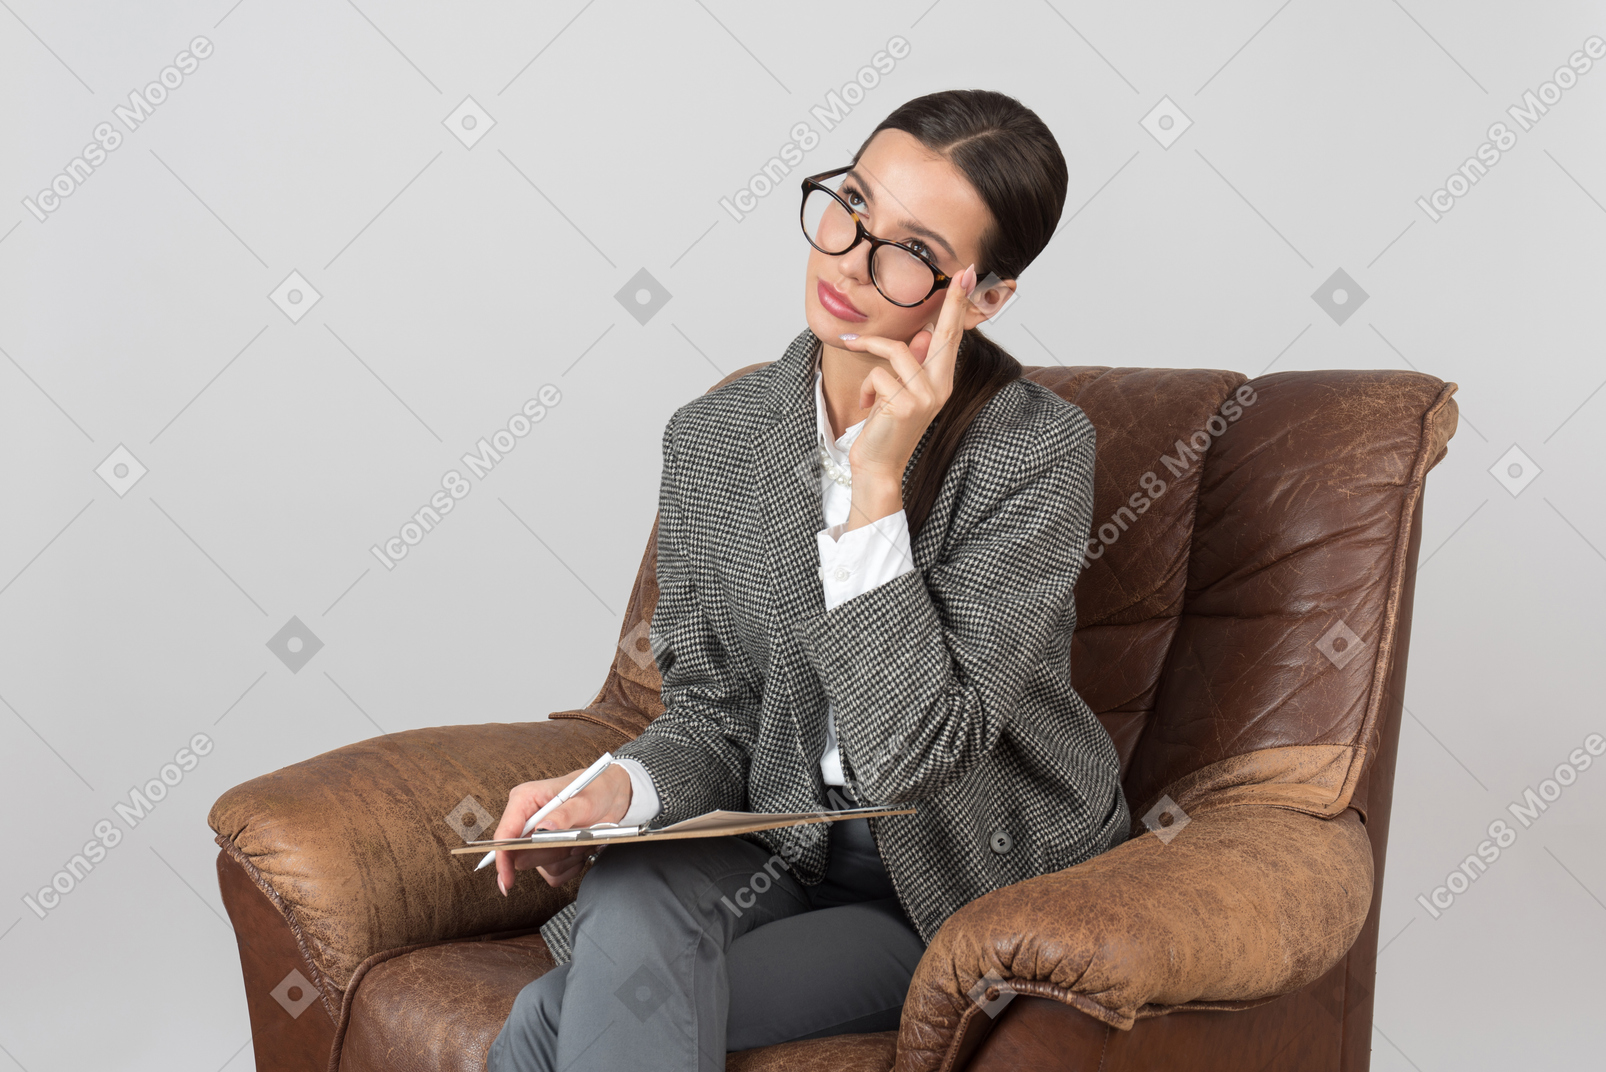 Pensive young woman sitting in chair and touching her eyeglasses